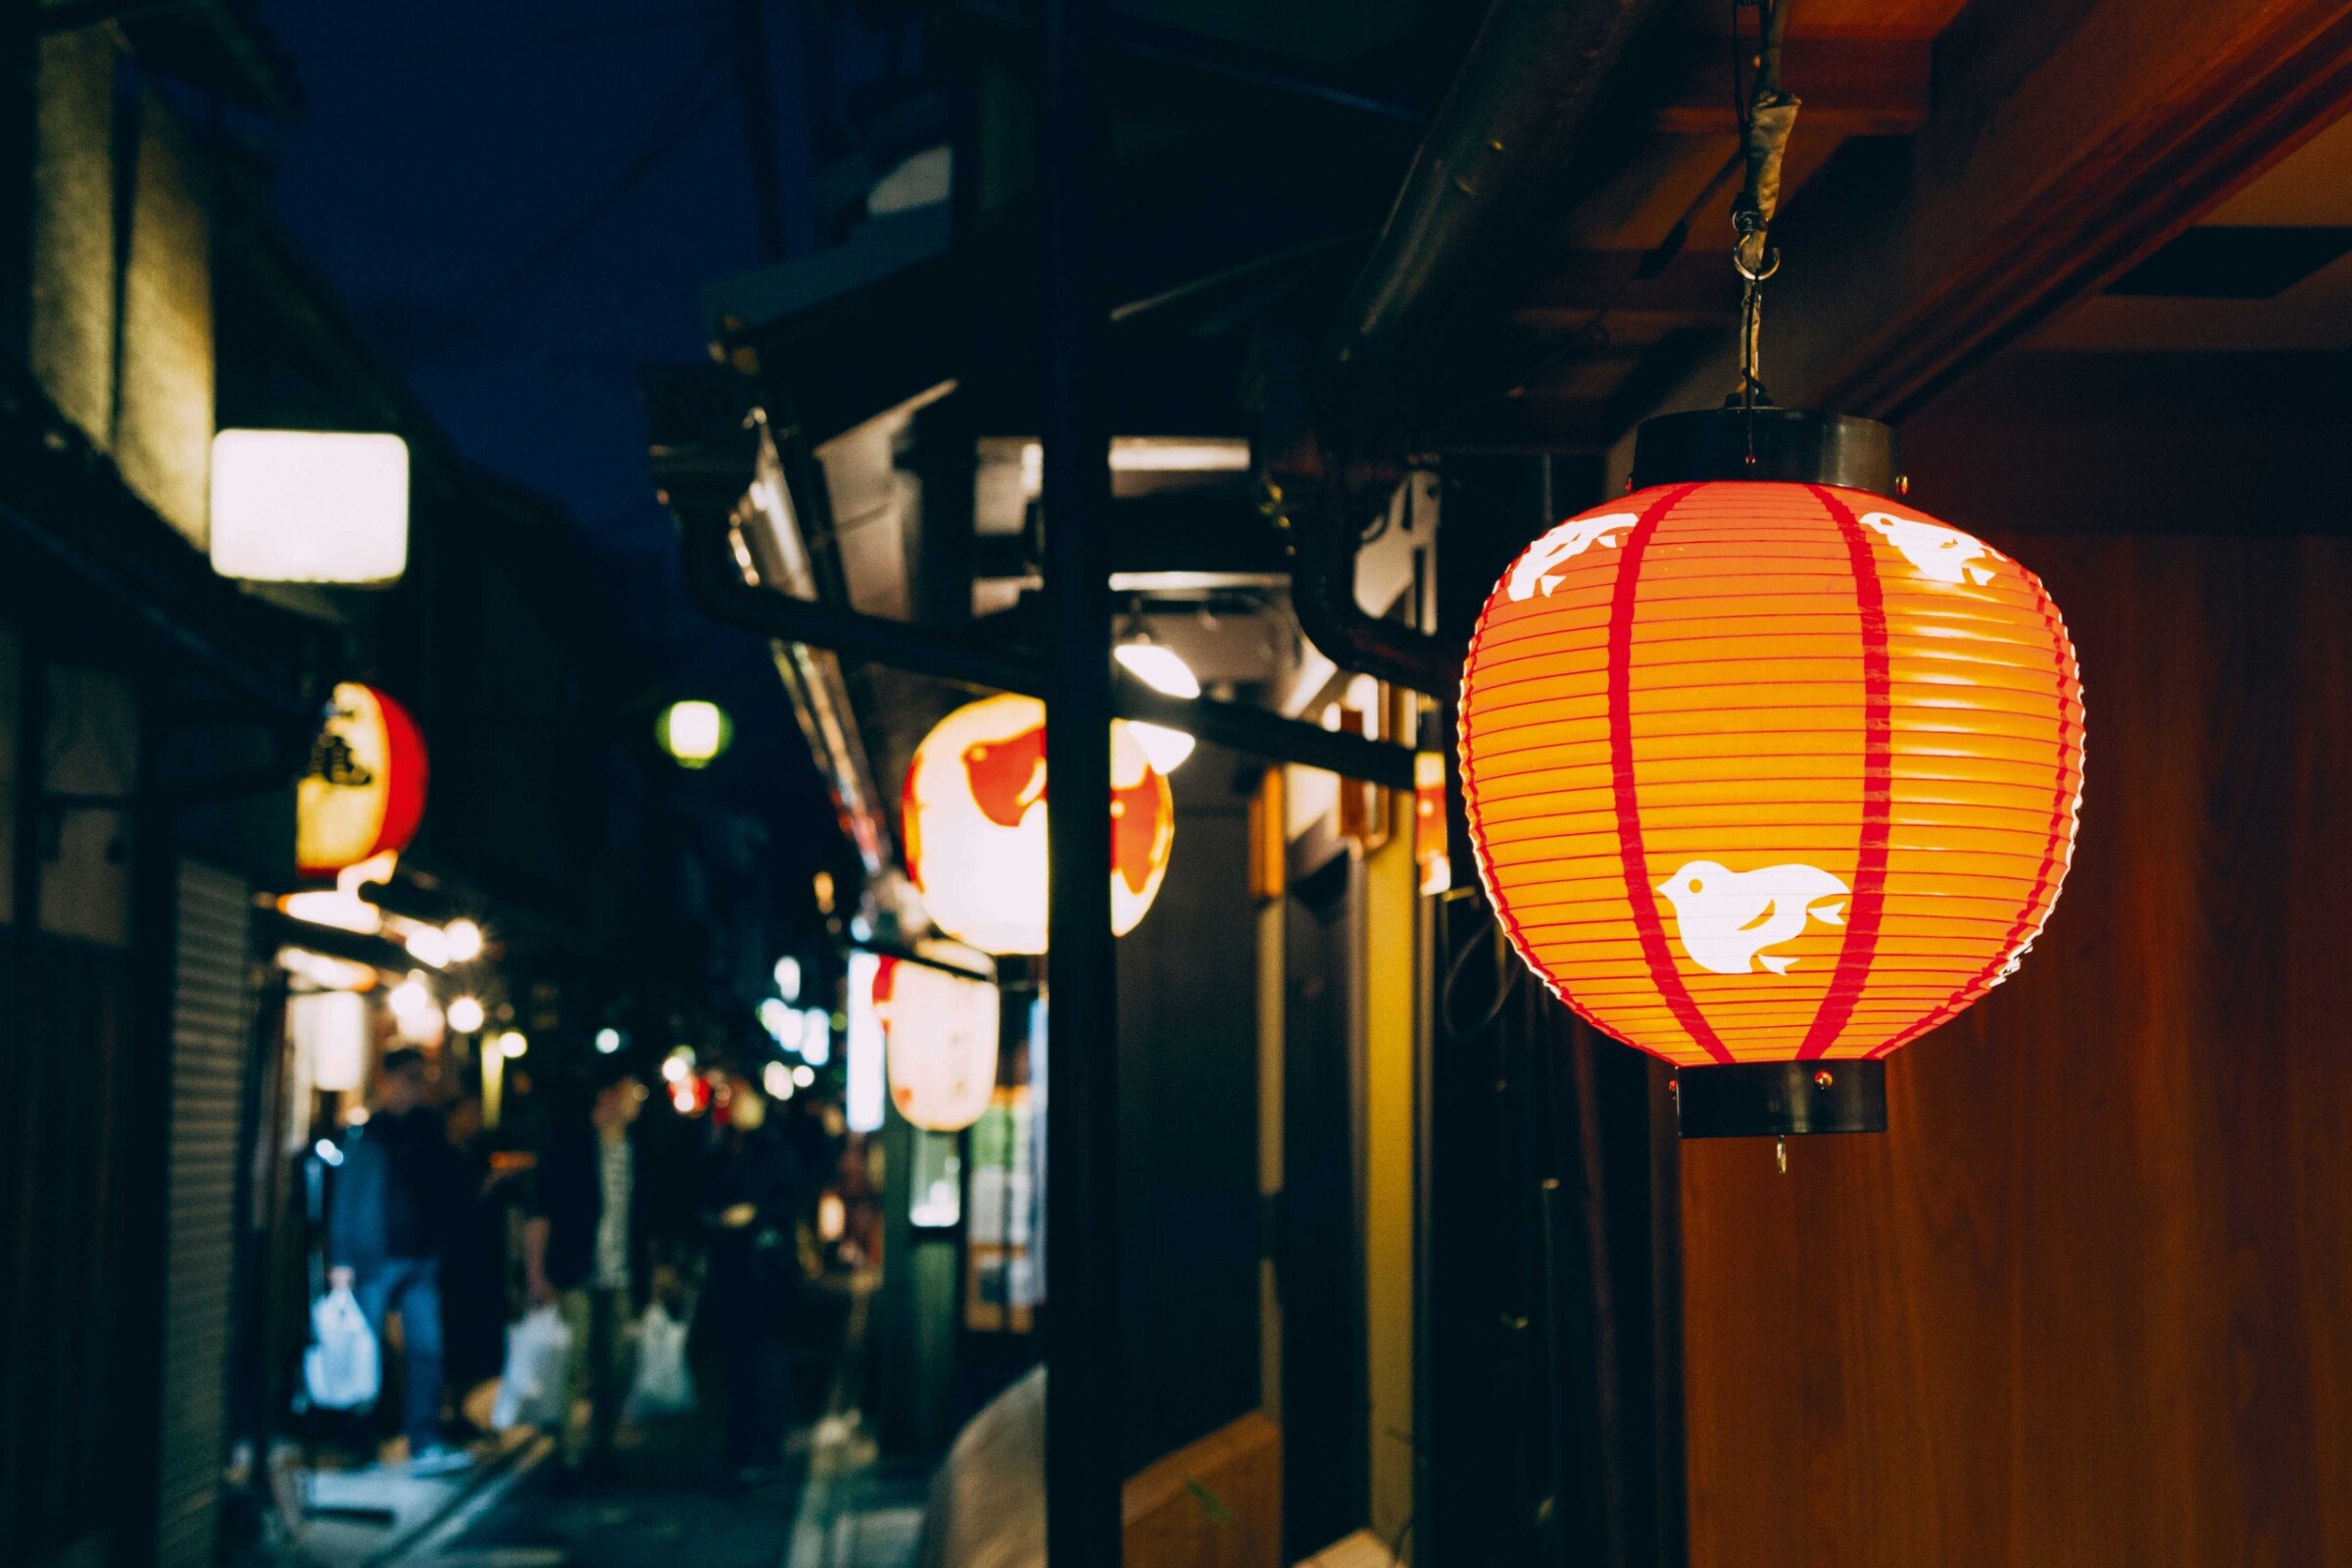 The Gion district in Kyoto at night